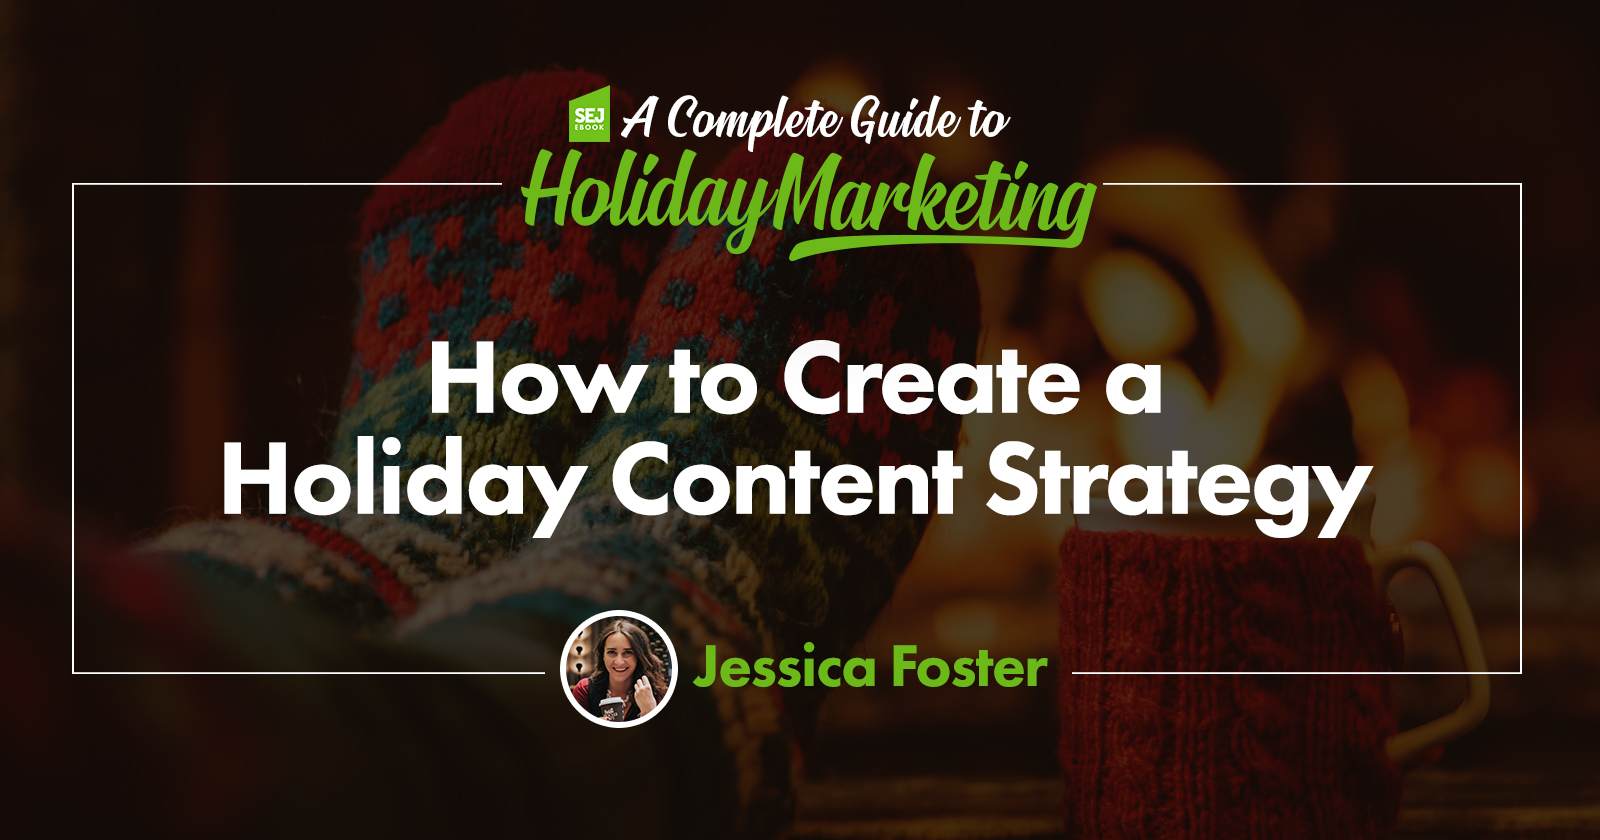 How to Create a Holiday Content Strategy